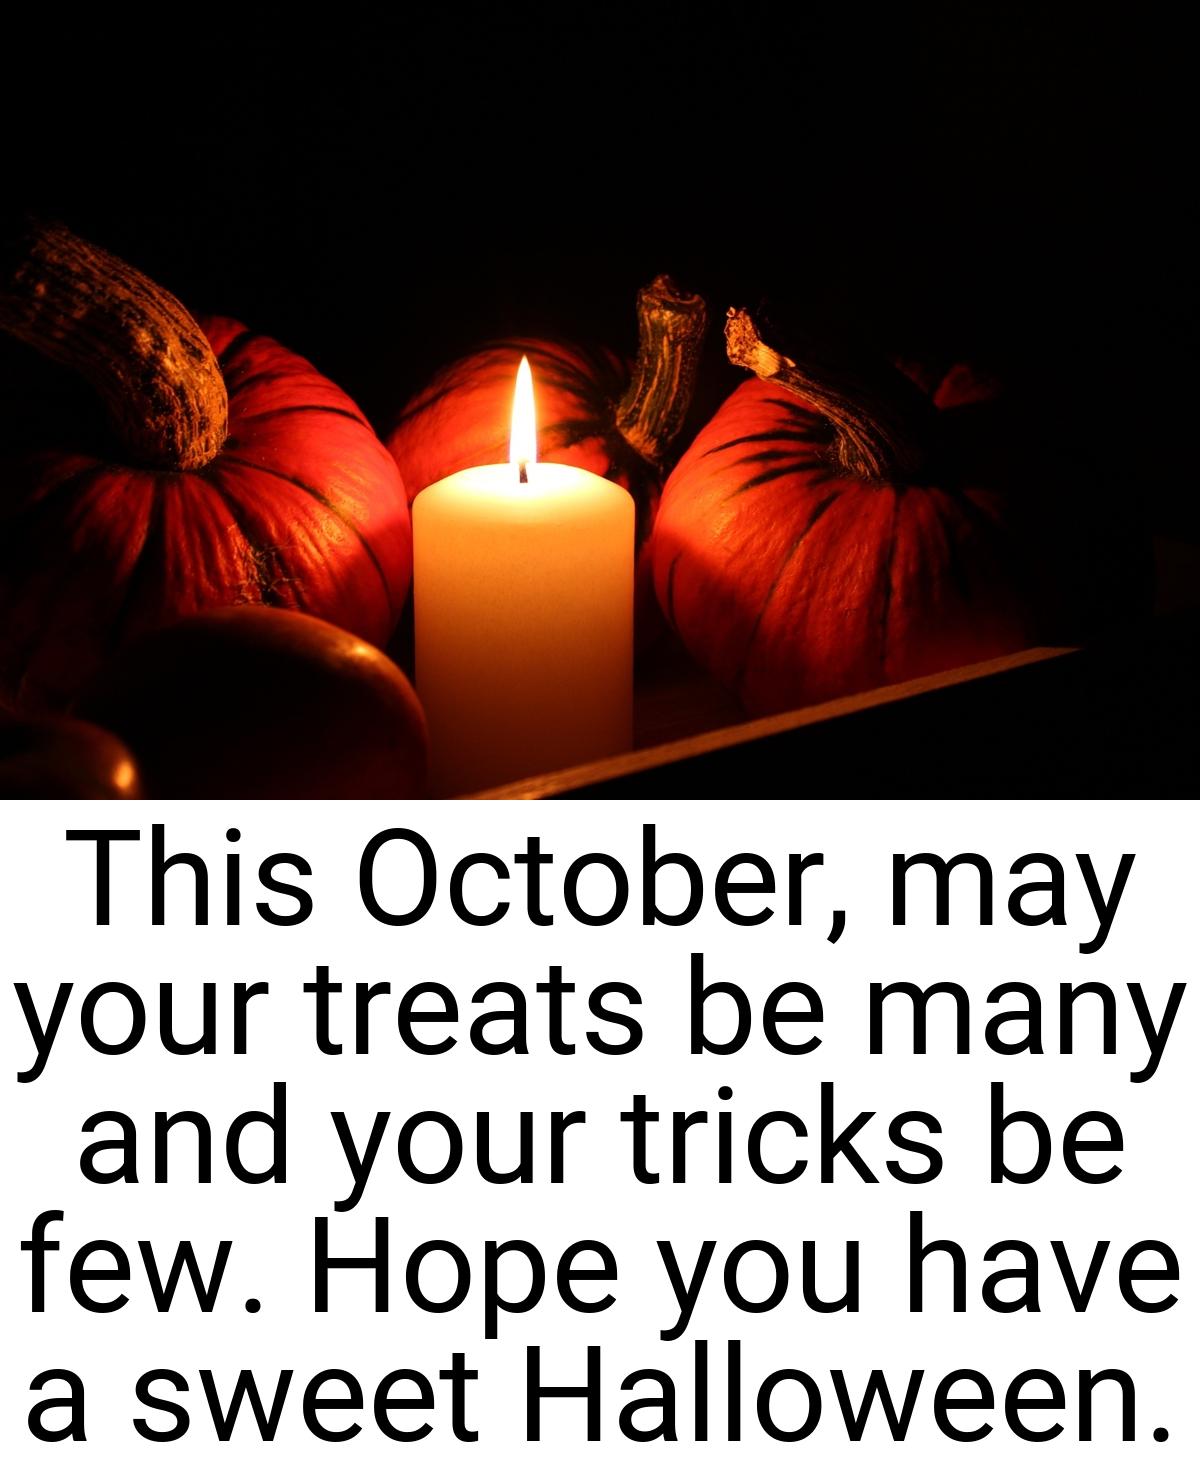 This October, may your treats be many and your tricks be